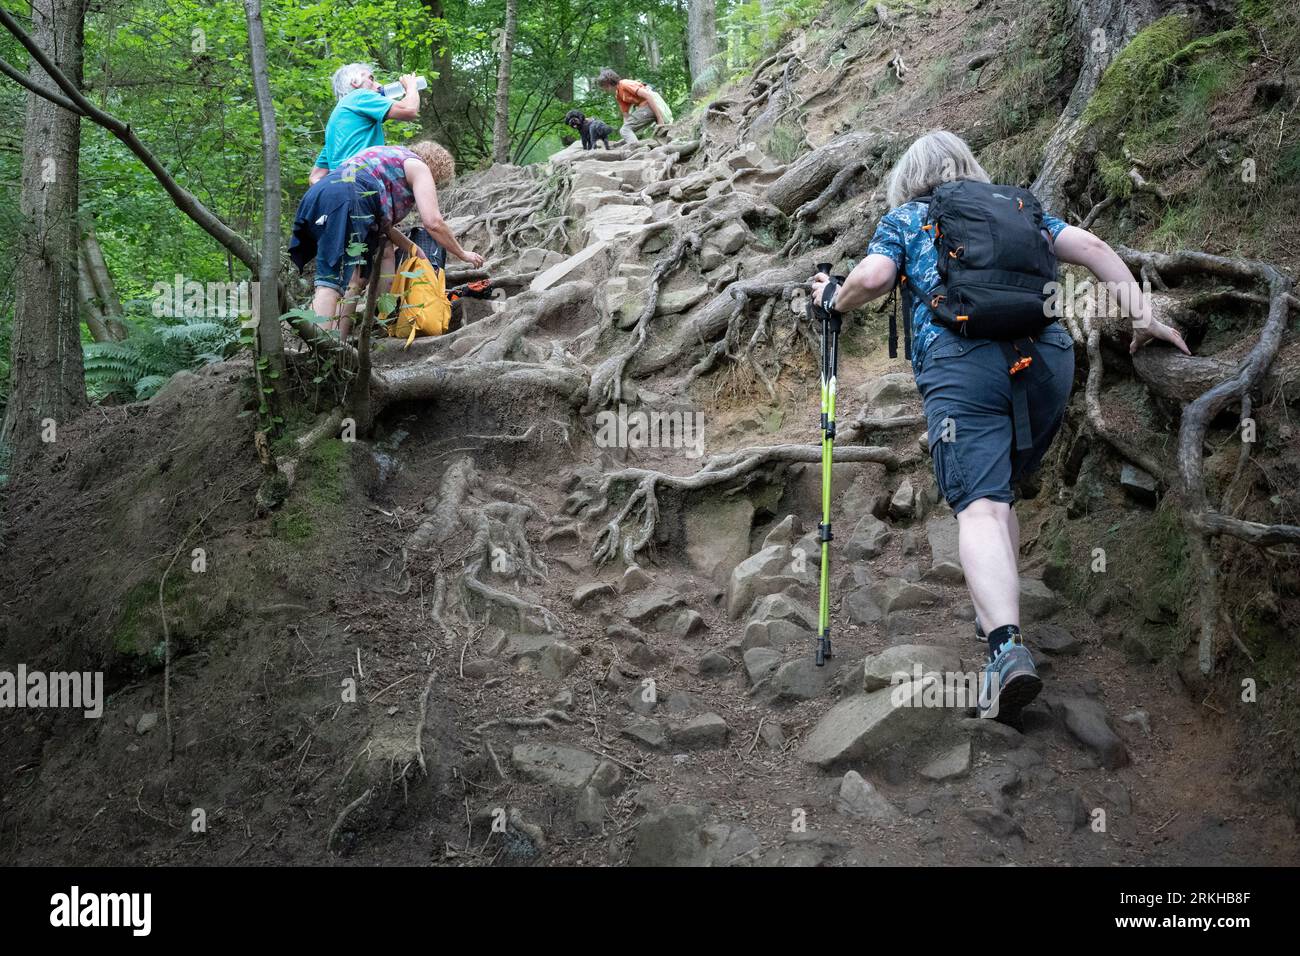 A group of friends climb a steep gradient consisting of rocks and tree roots near Ladybower Reservoir in the Peak District, on 22nd August 2023, in Sheffield, England. Stock Photo